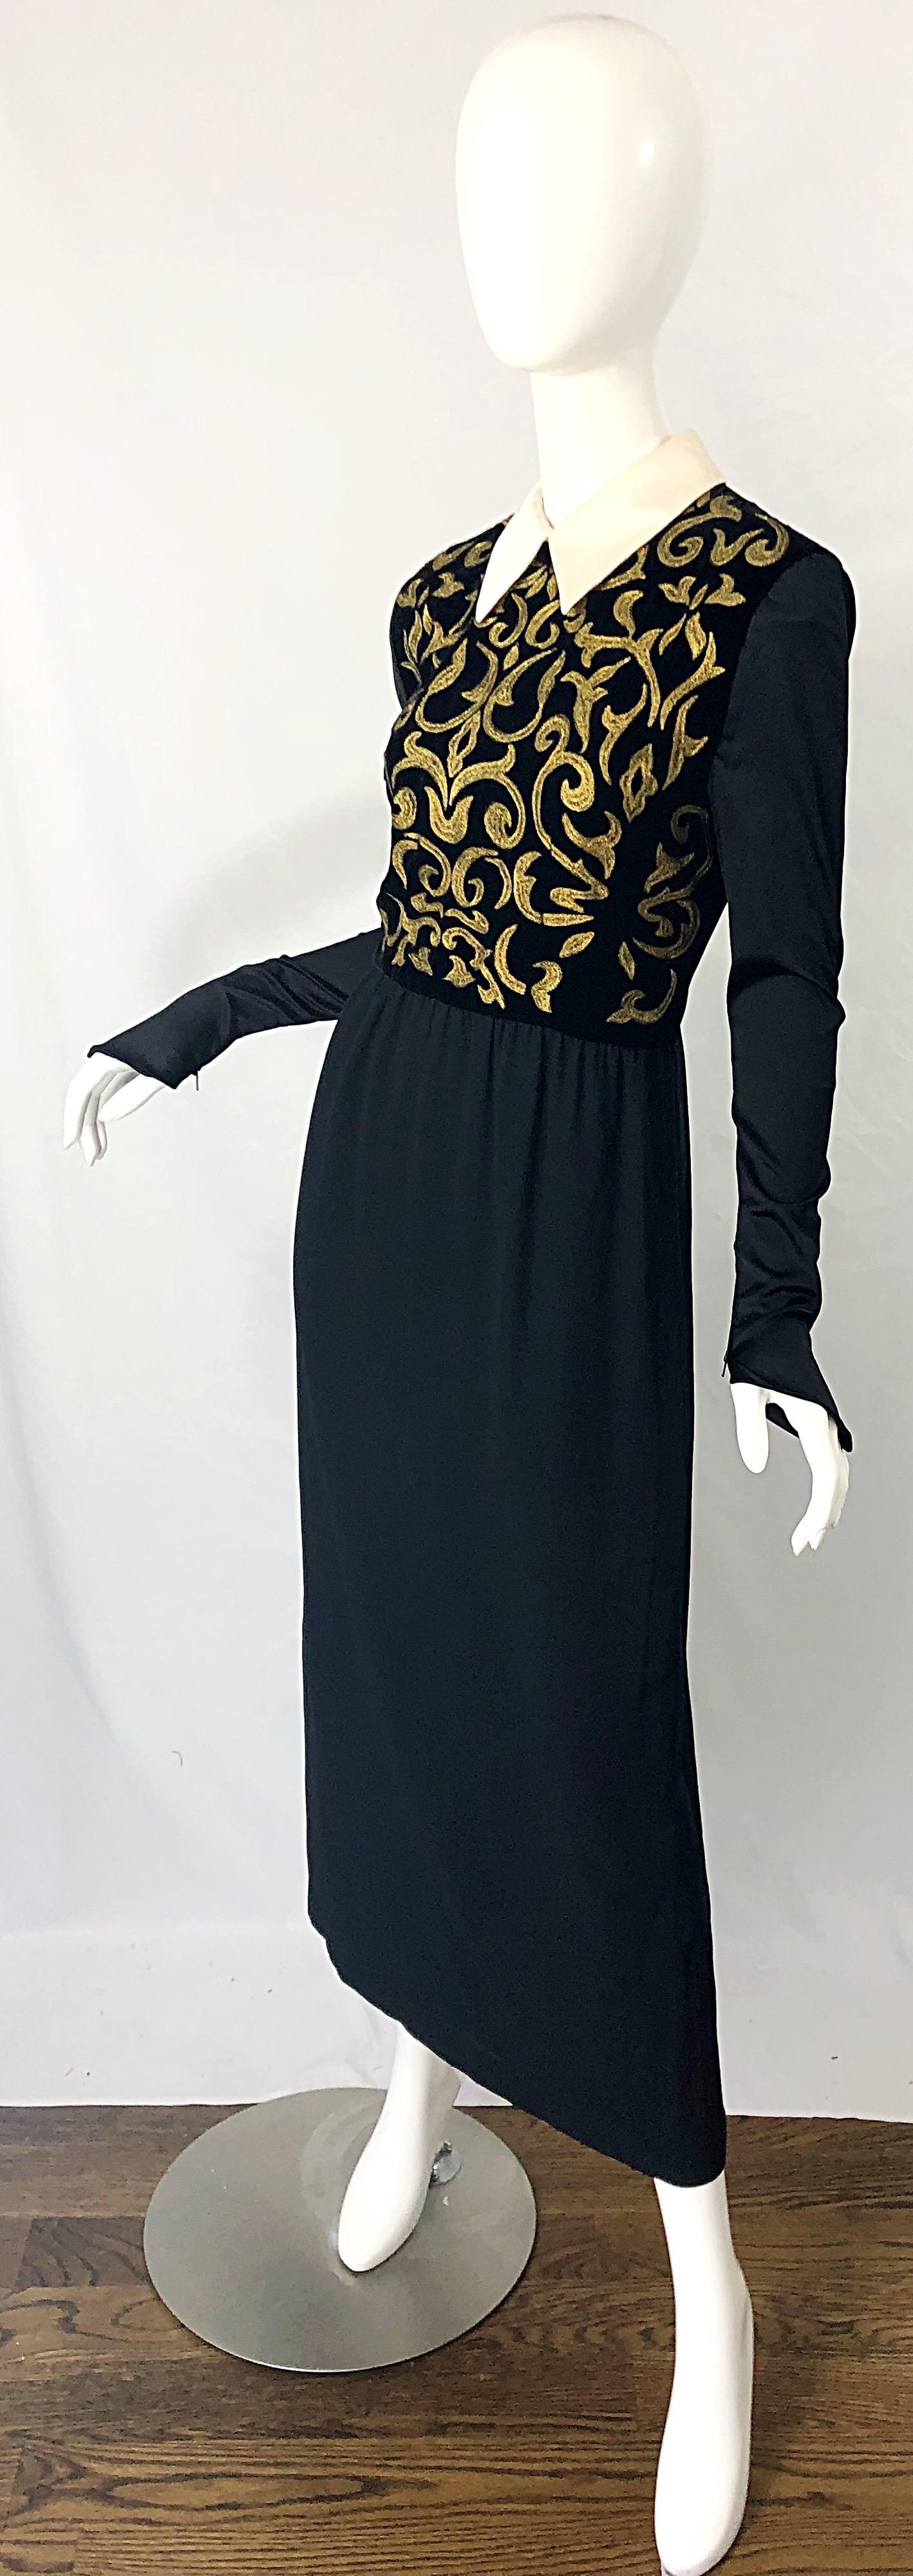 Women's Karl Lagerfeld Runway Fall 1988 Black Gold Embroidered Vintage 80s Gown Dress For Sale